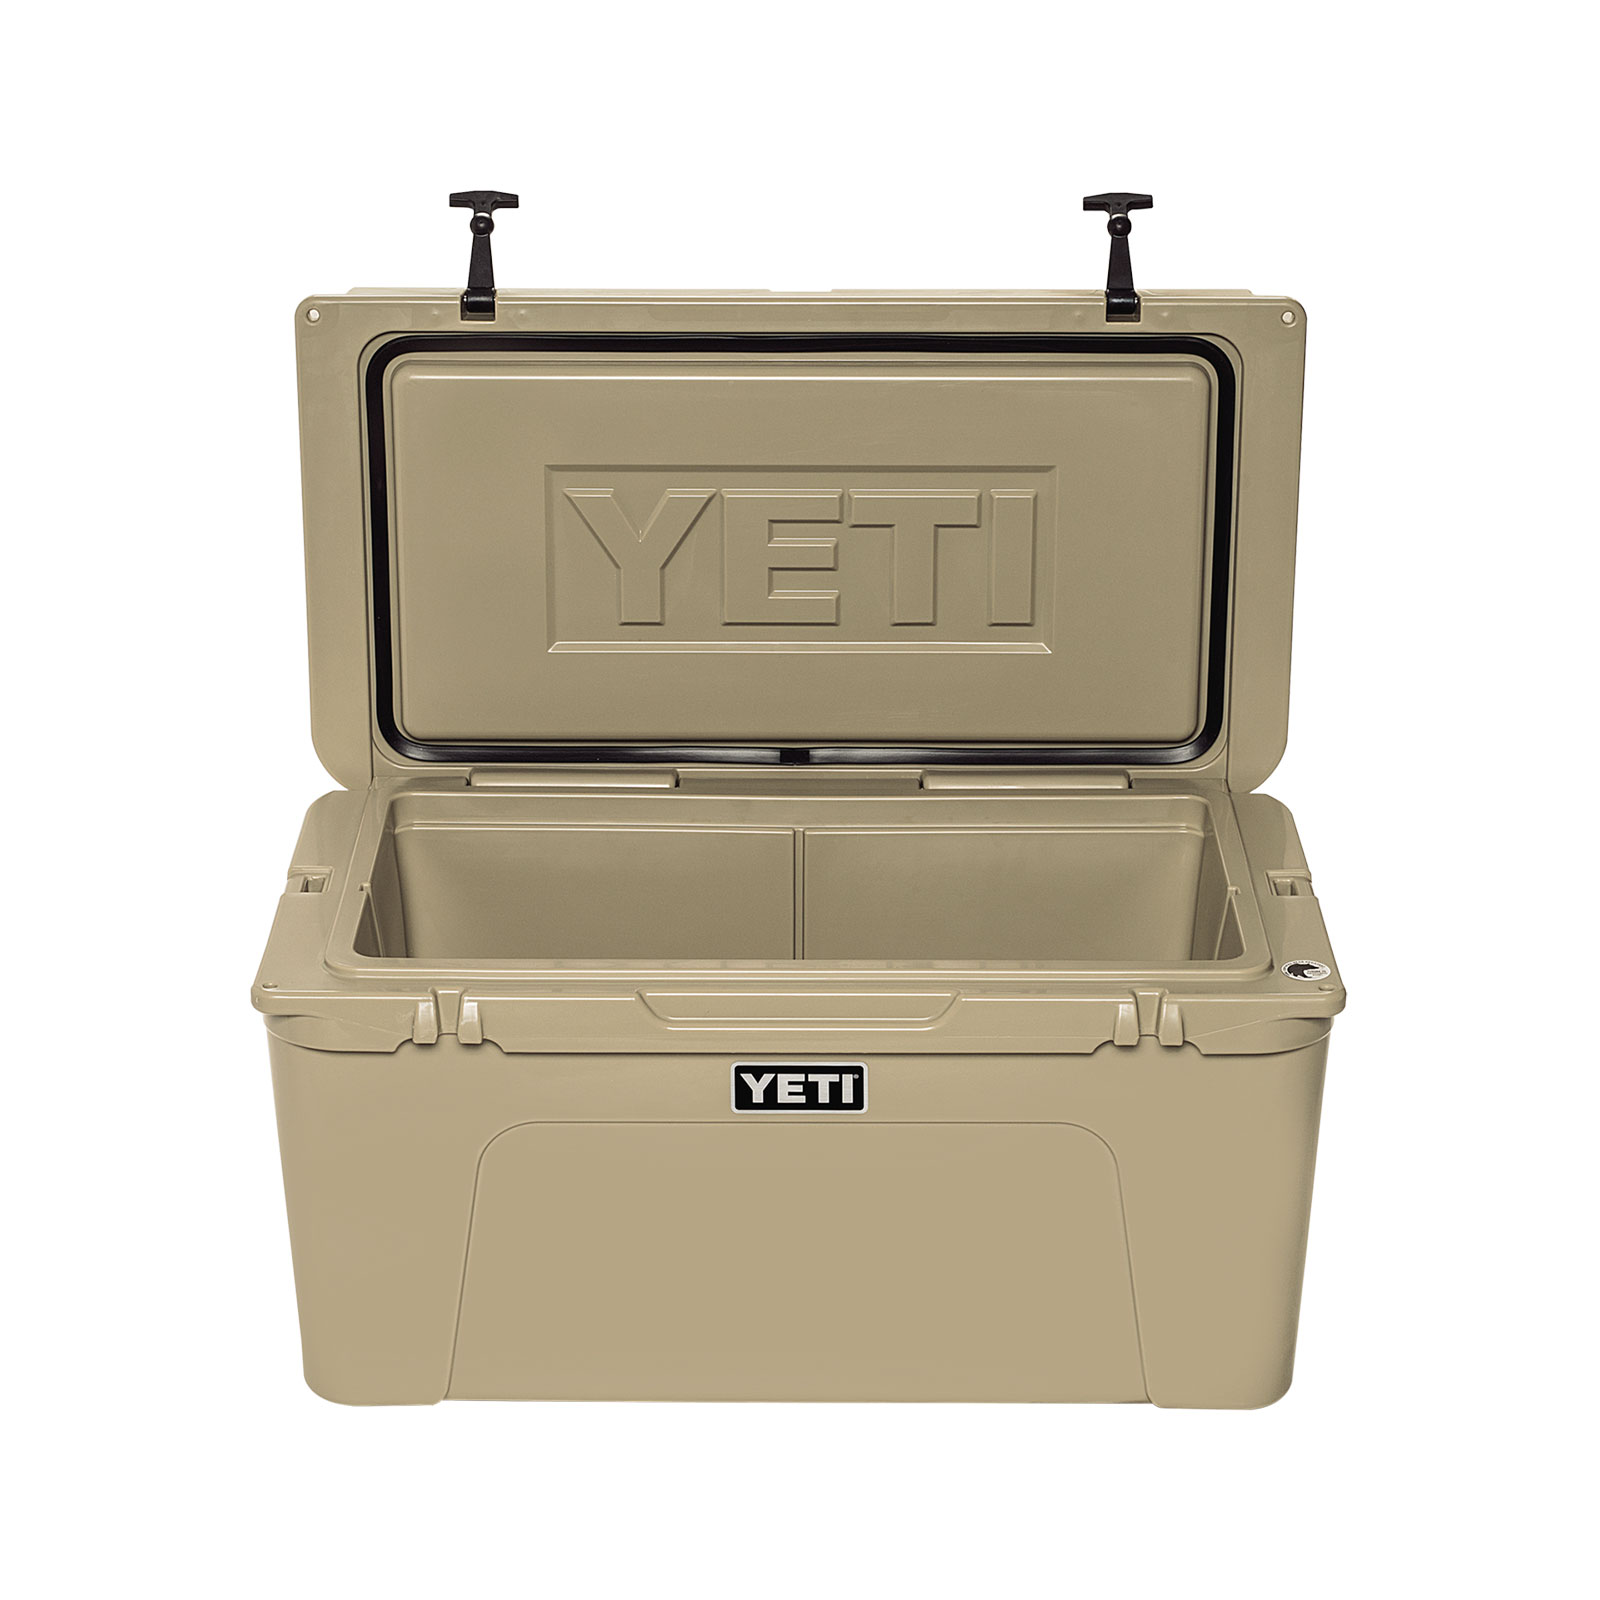 Sold at Auction: USED YETI 75 TAN COOLER